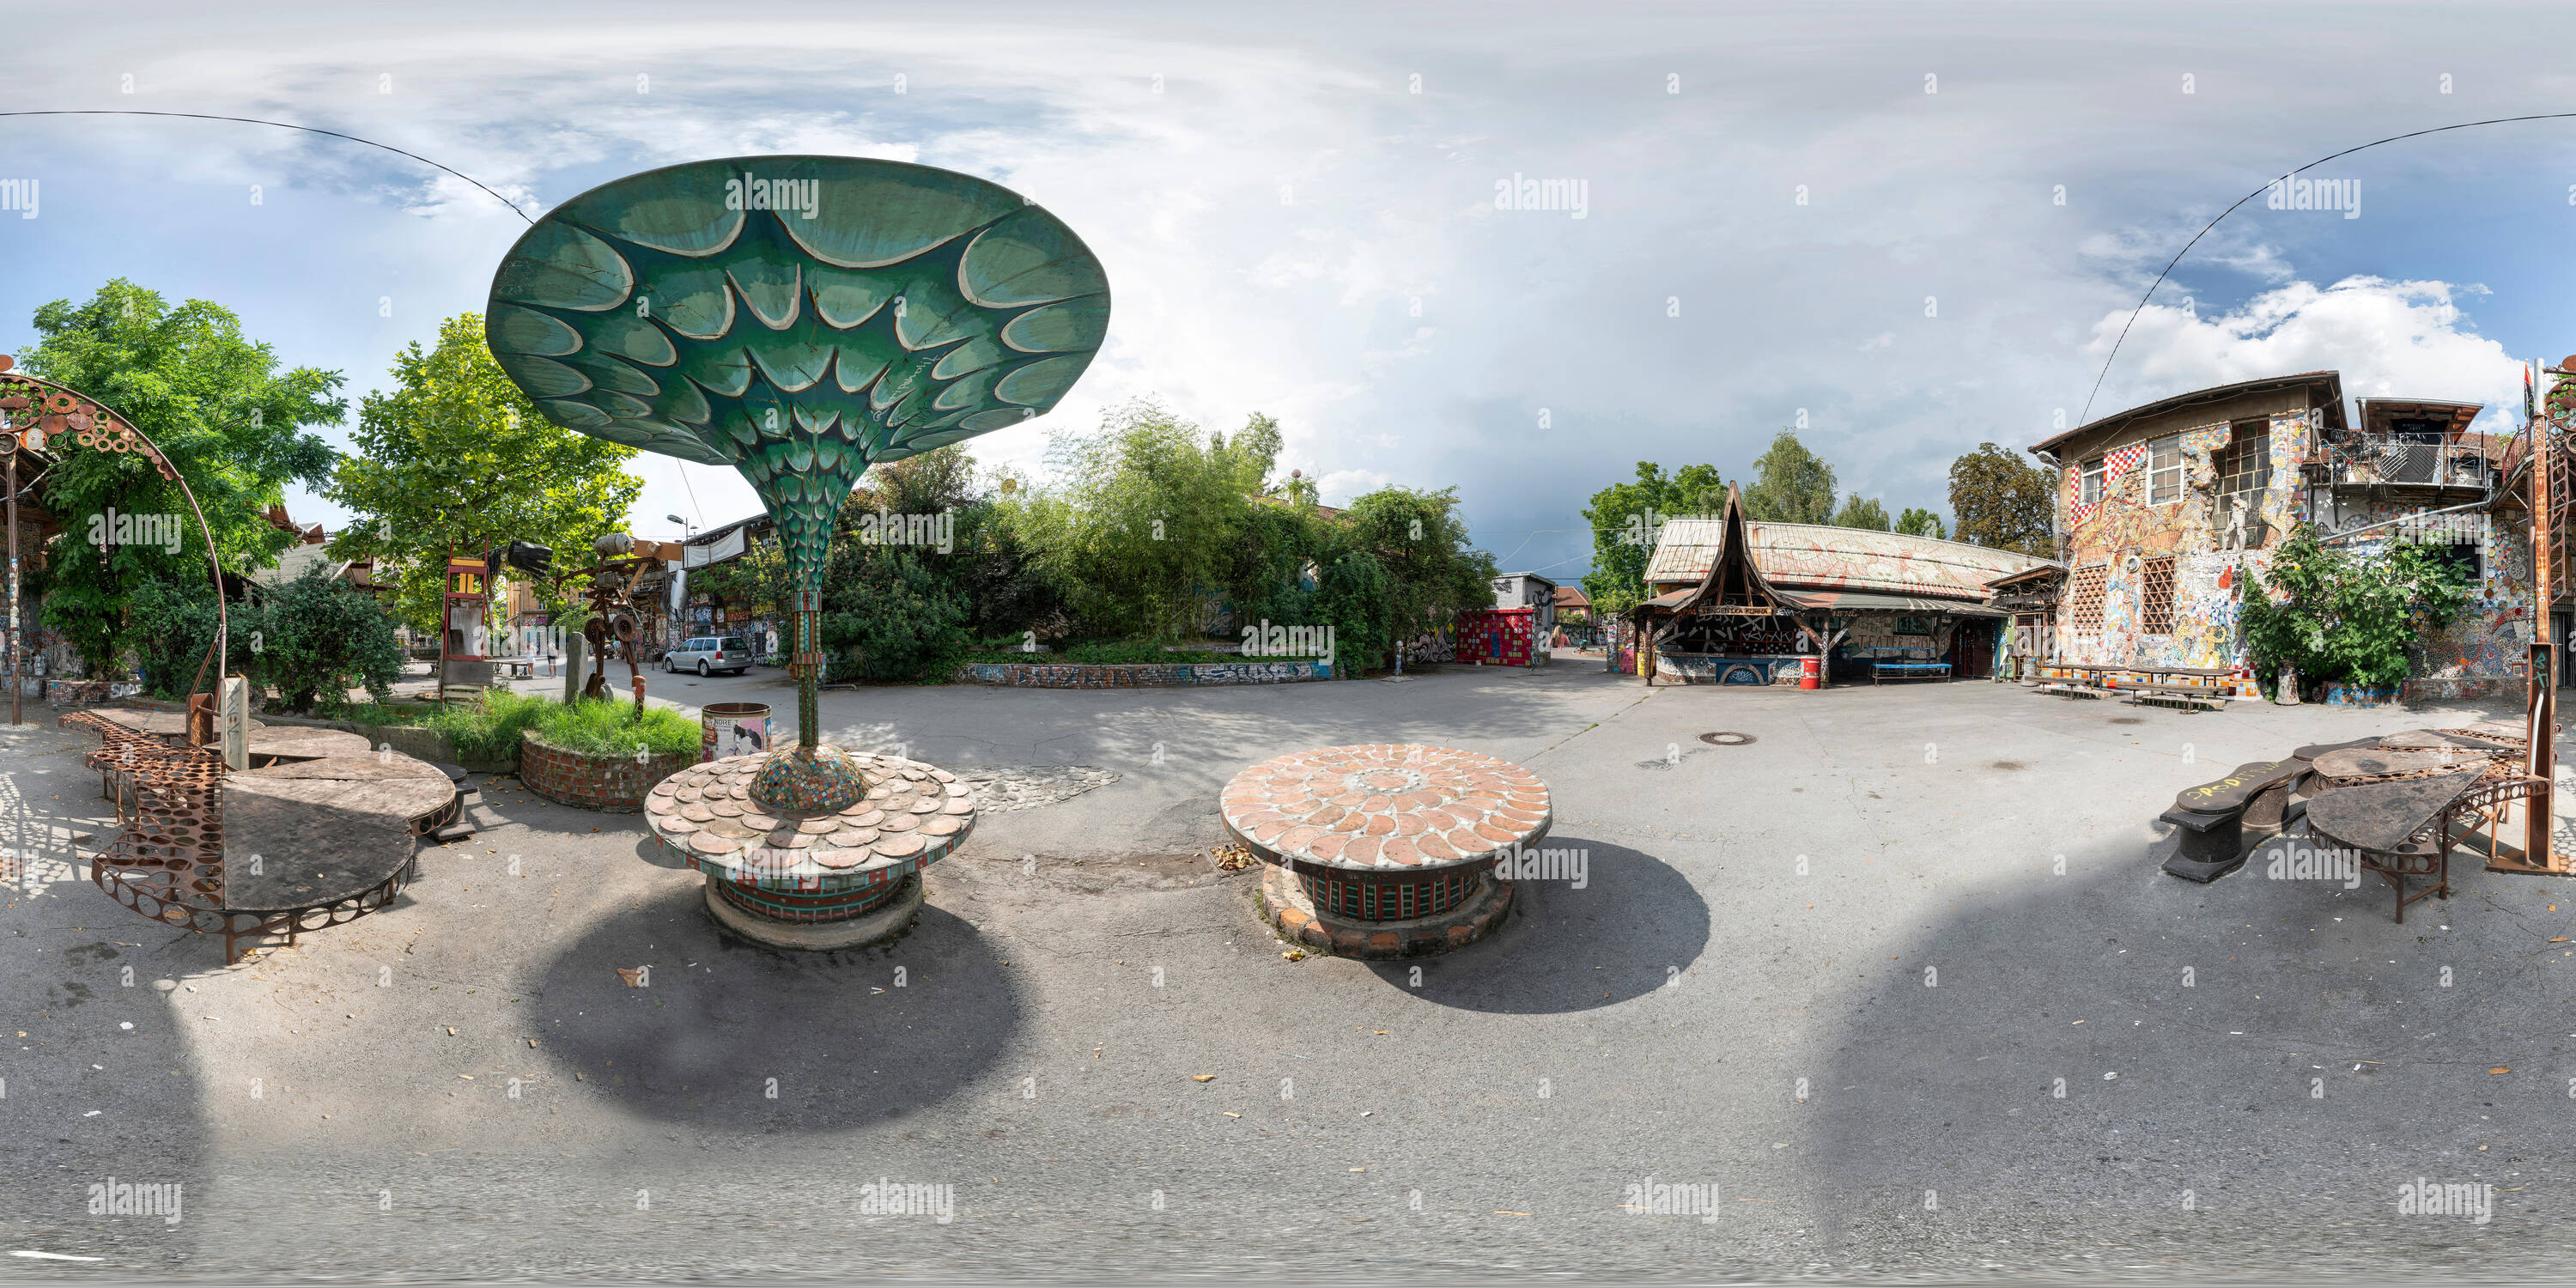 360 degree panoramic view of Ljubljana, Slovenia. August 3, 2019. A 360 degrees spherical view of  the social and cultural center of Metelkova in the city center